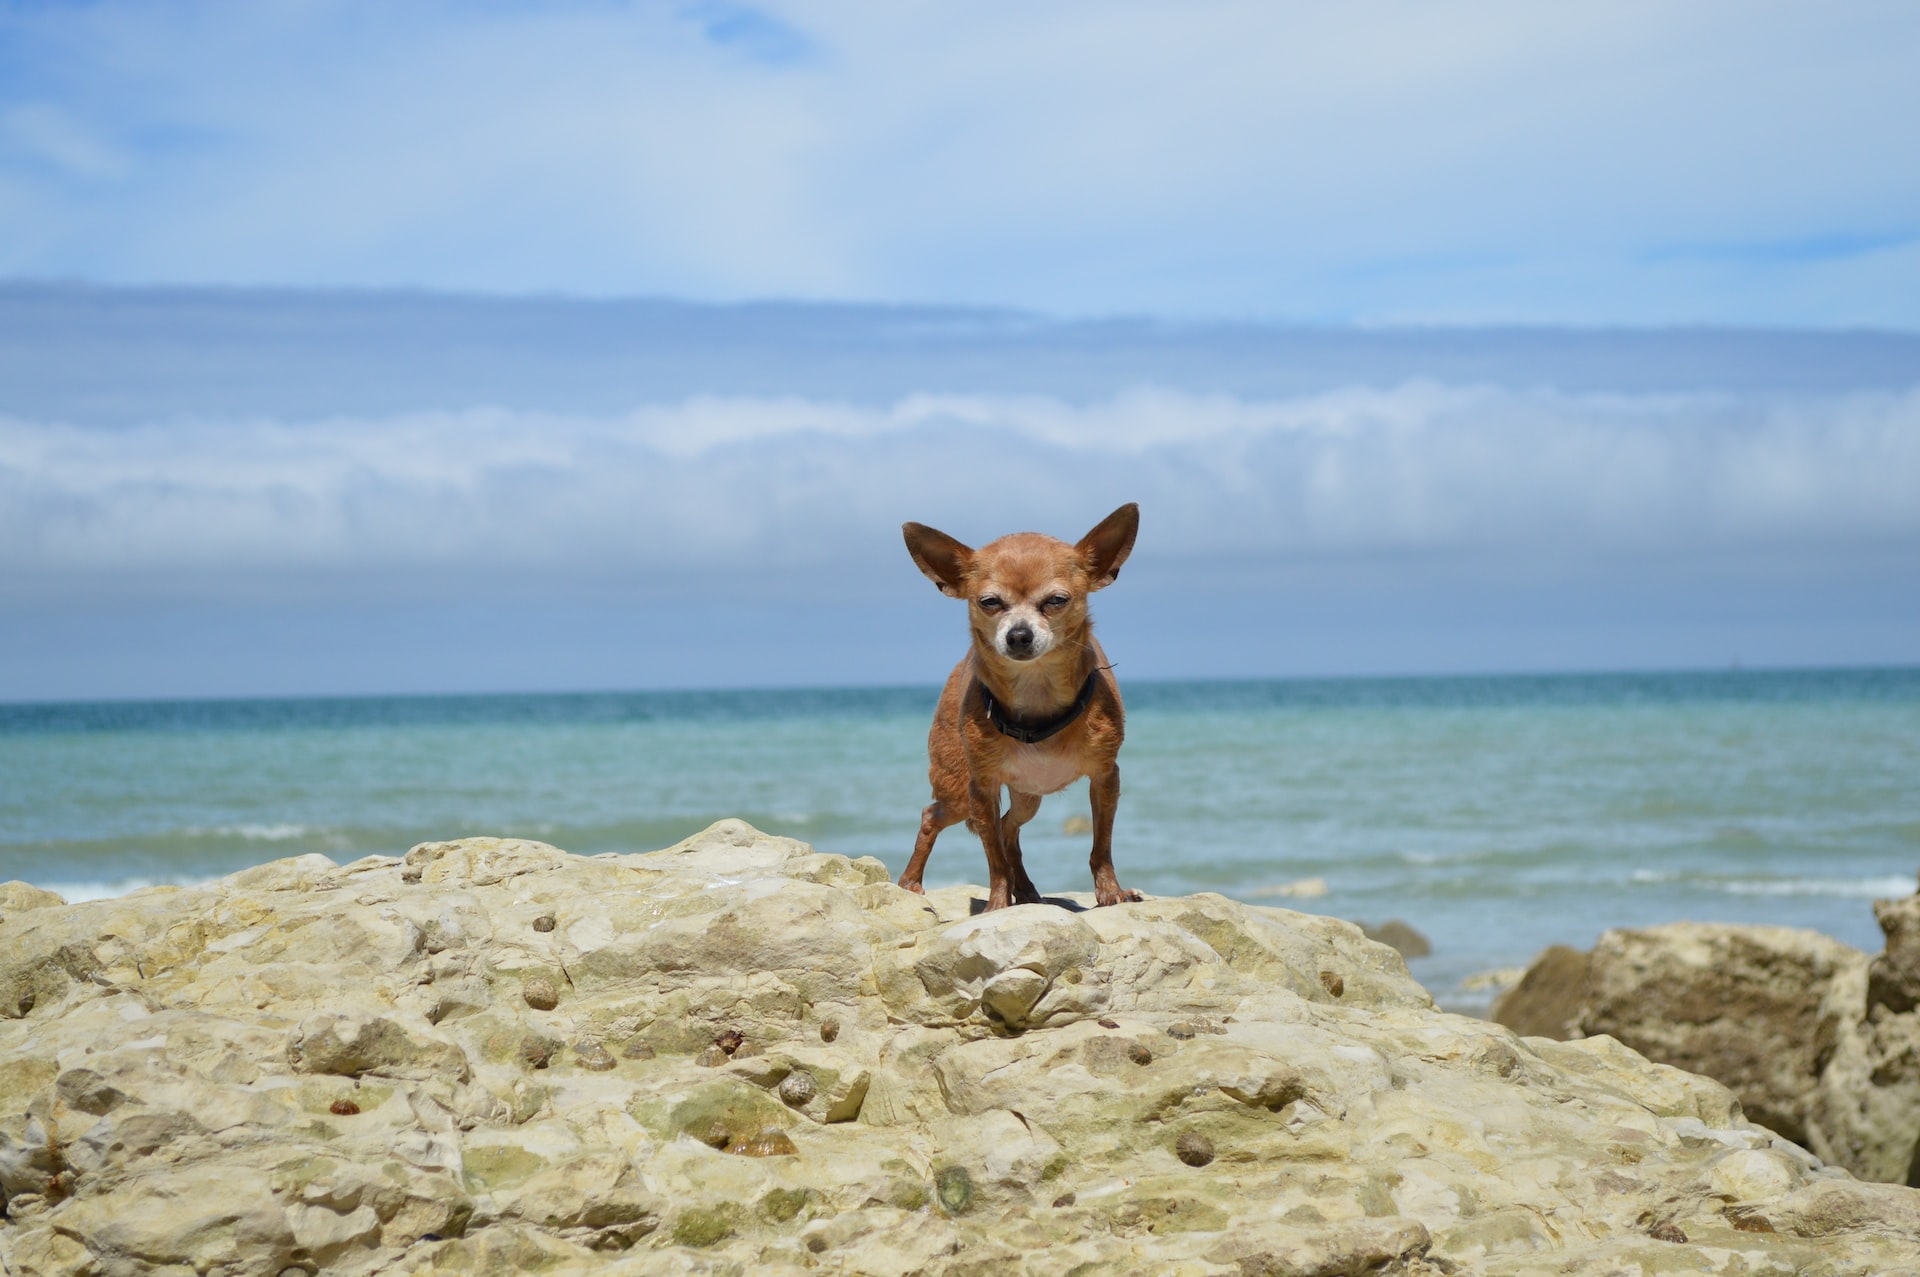 Bunny the Chihuahua on the beach.